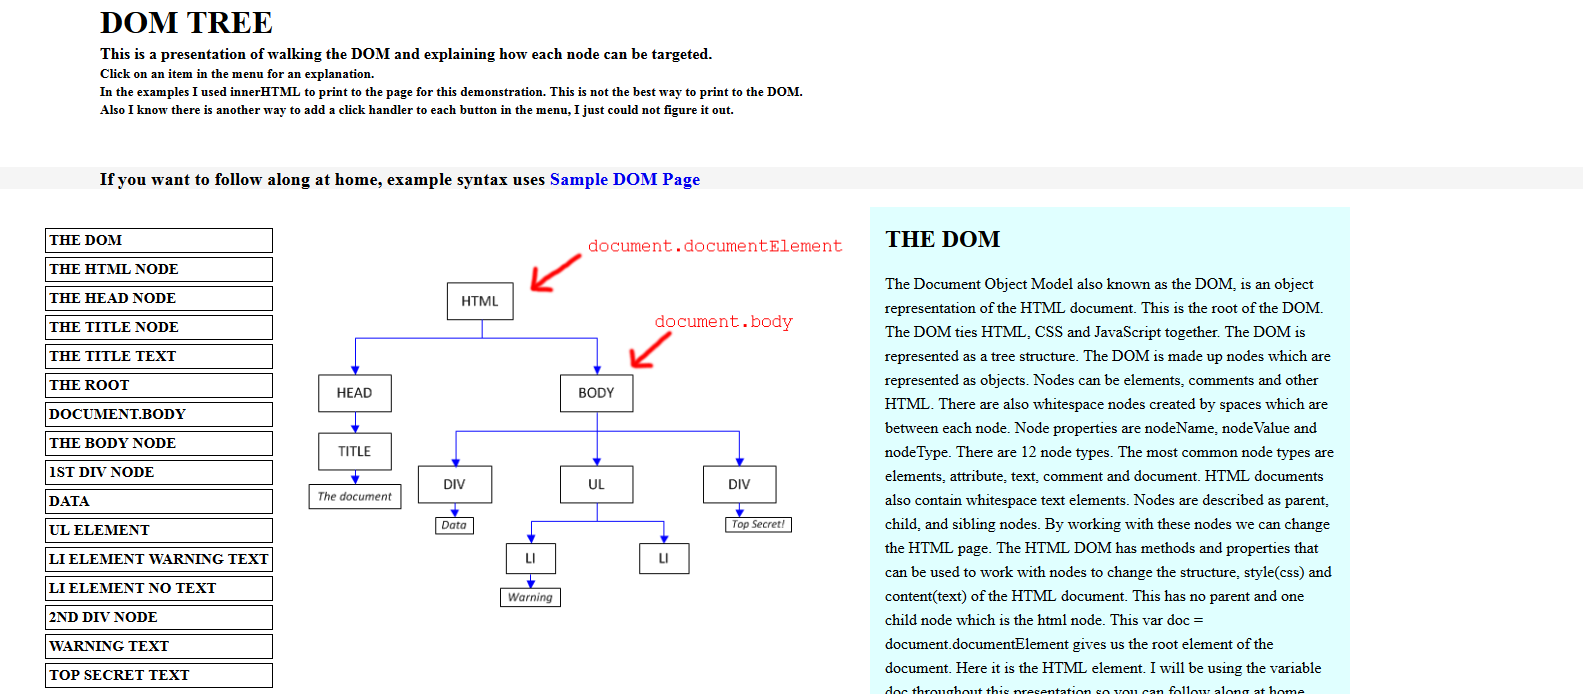 The Dom Document Object Model